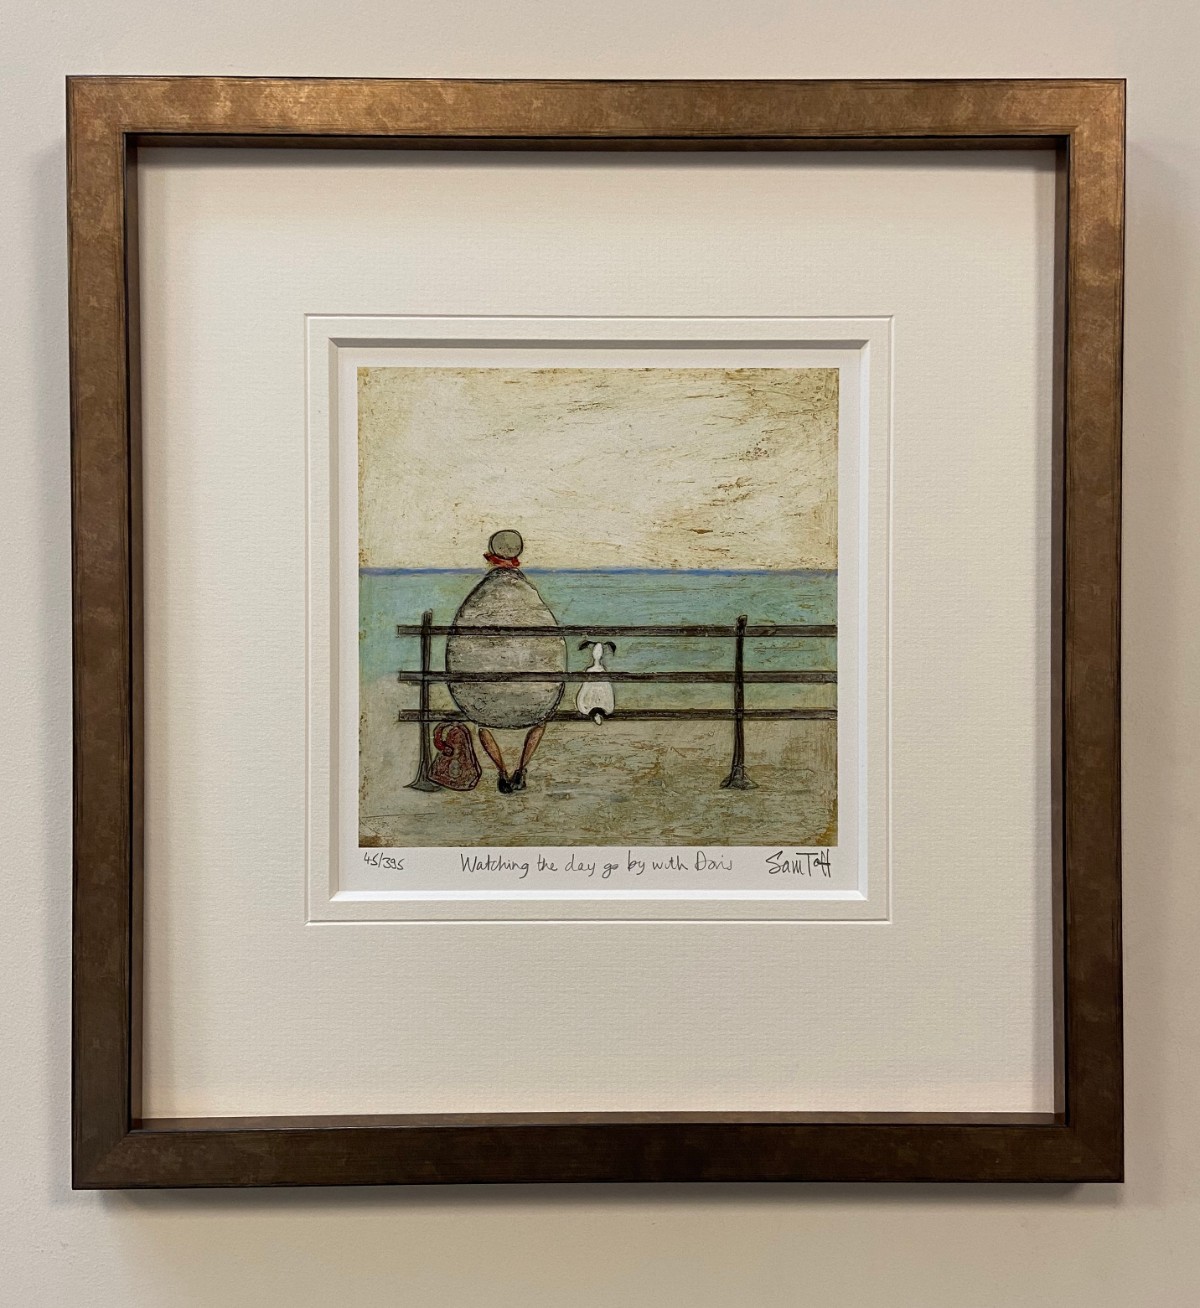 Watching the Day go by with Doris by Sam Toft